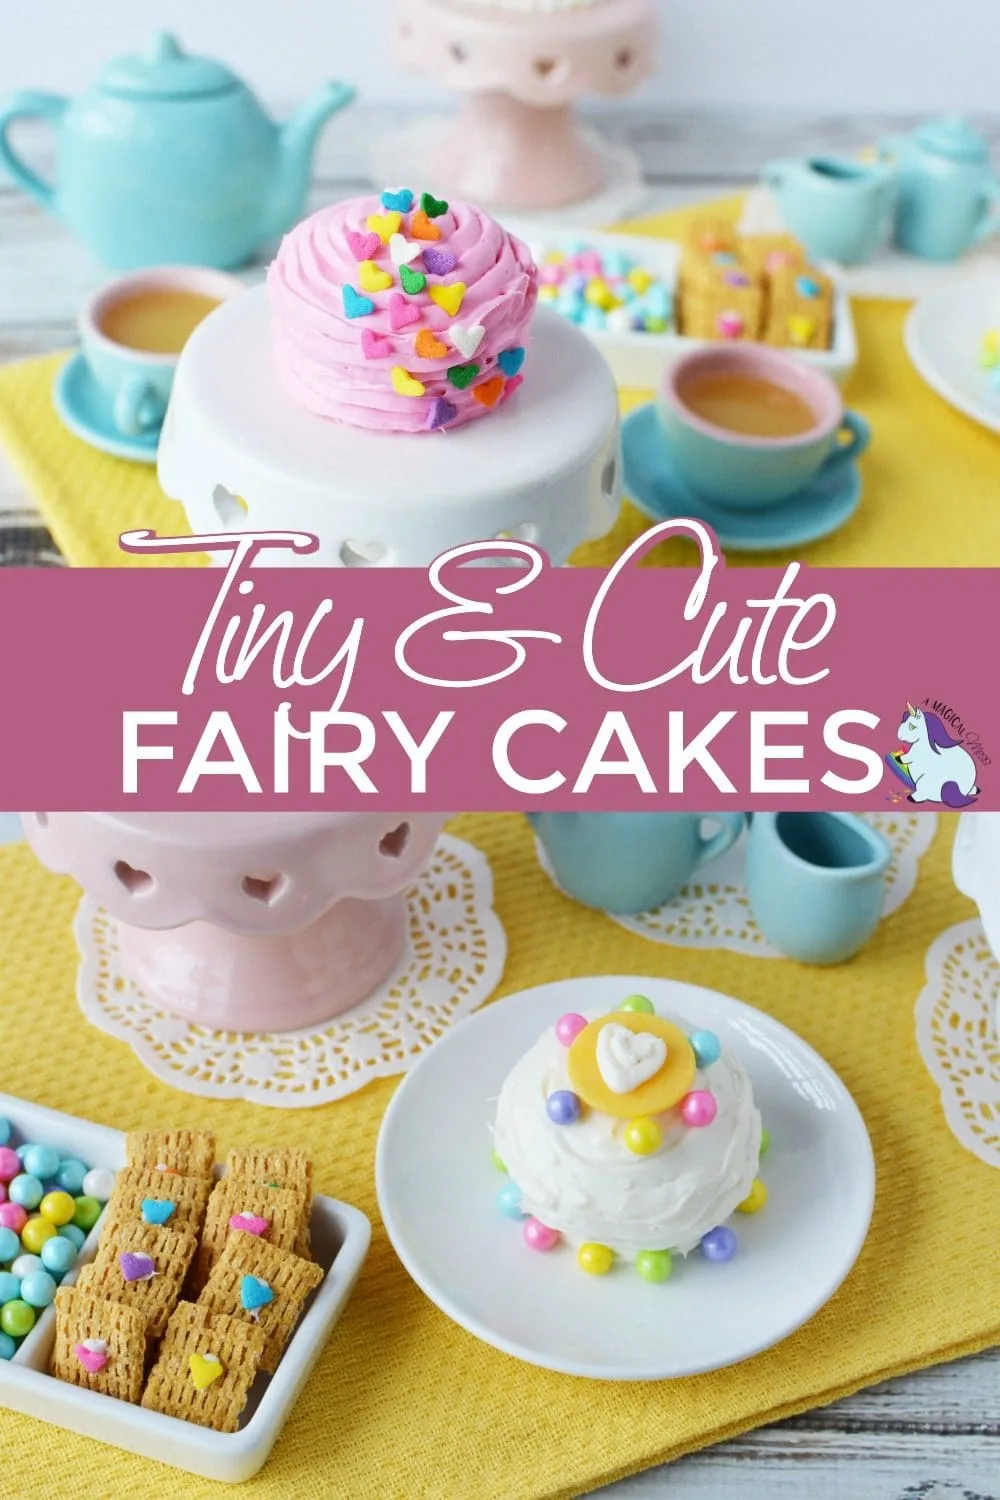 Fairy cakes surrounded by tea party supplies.